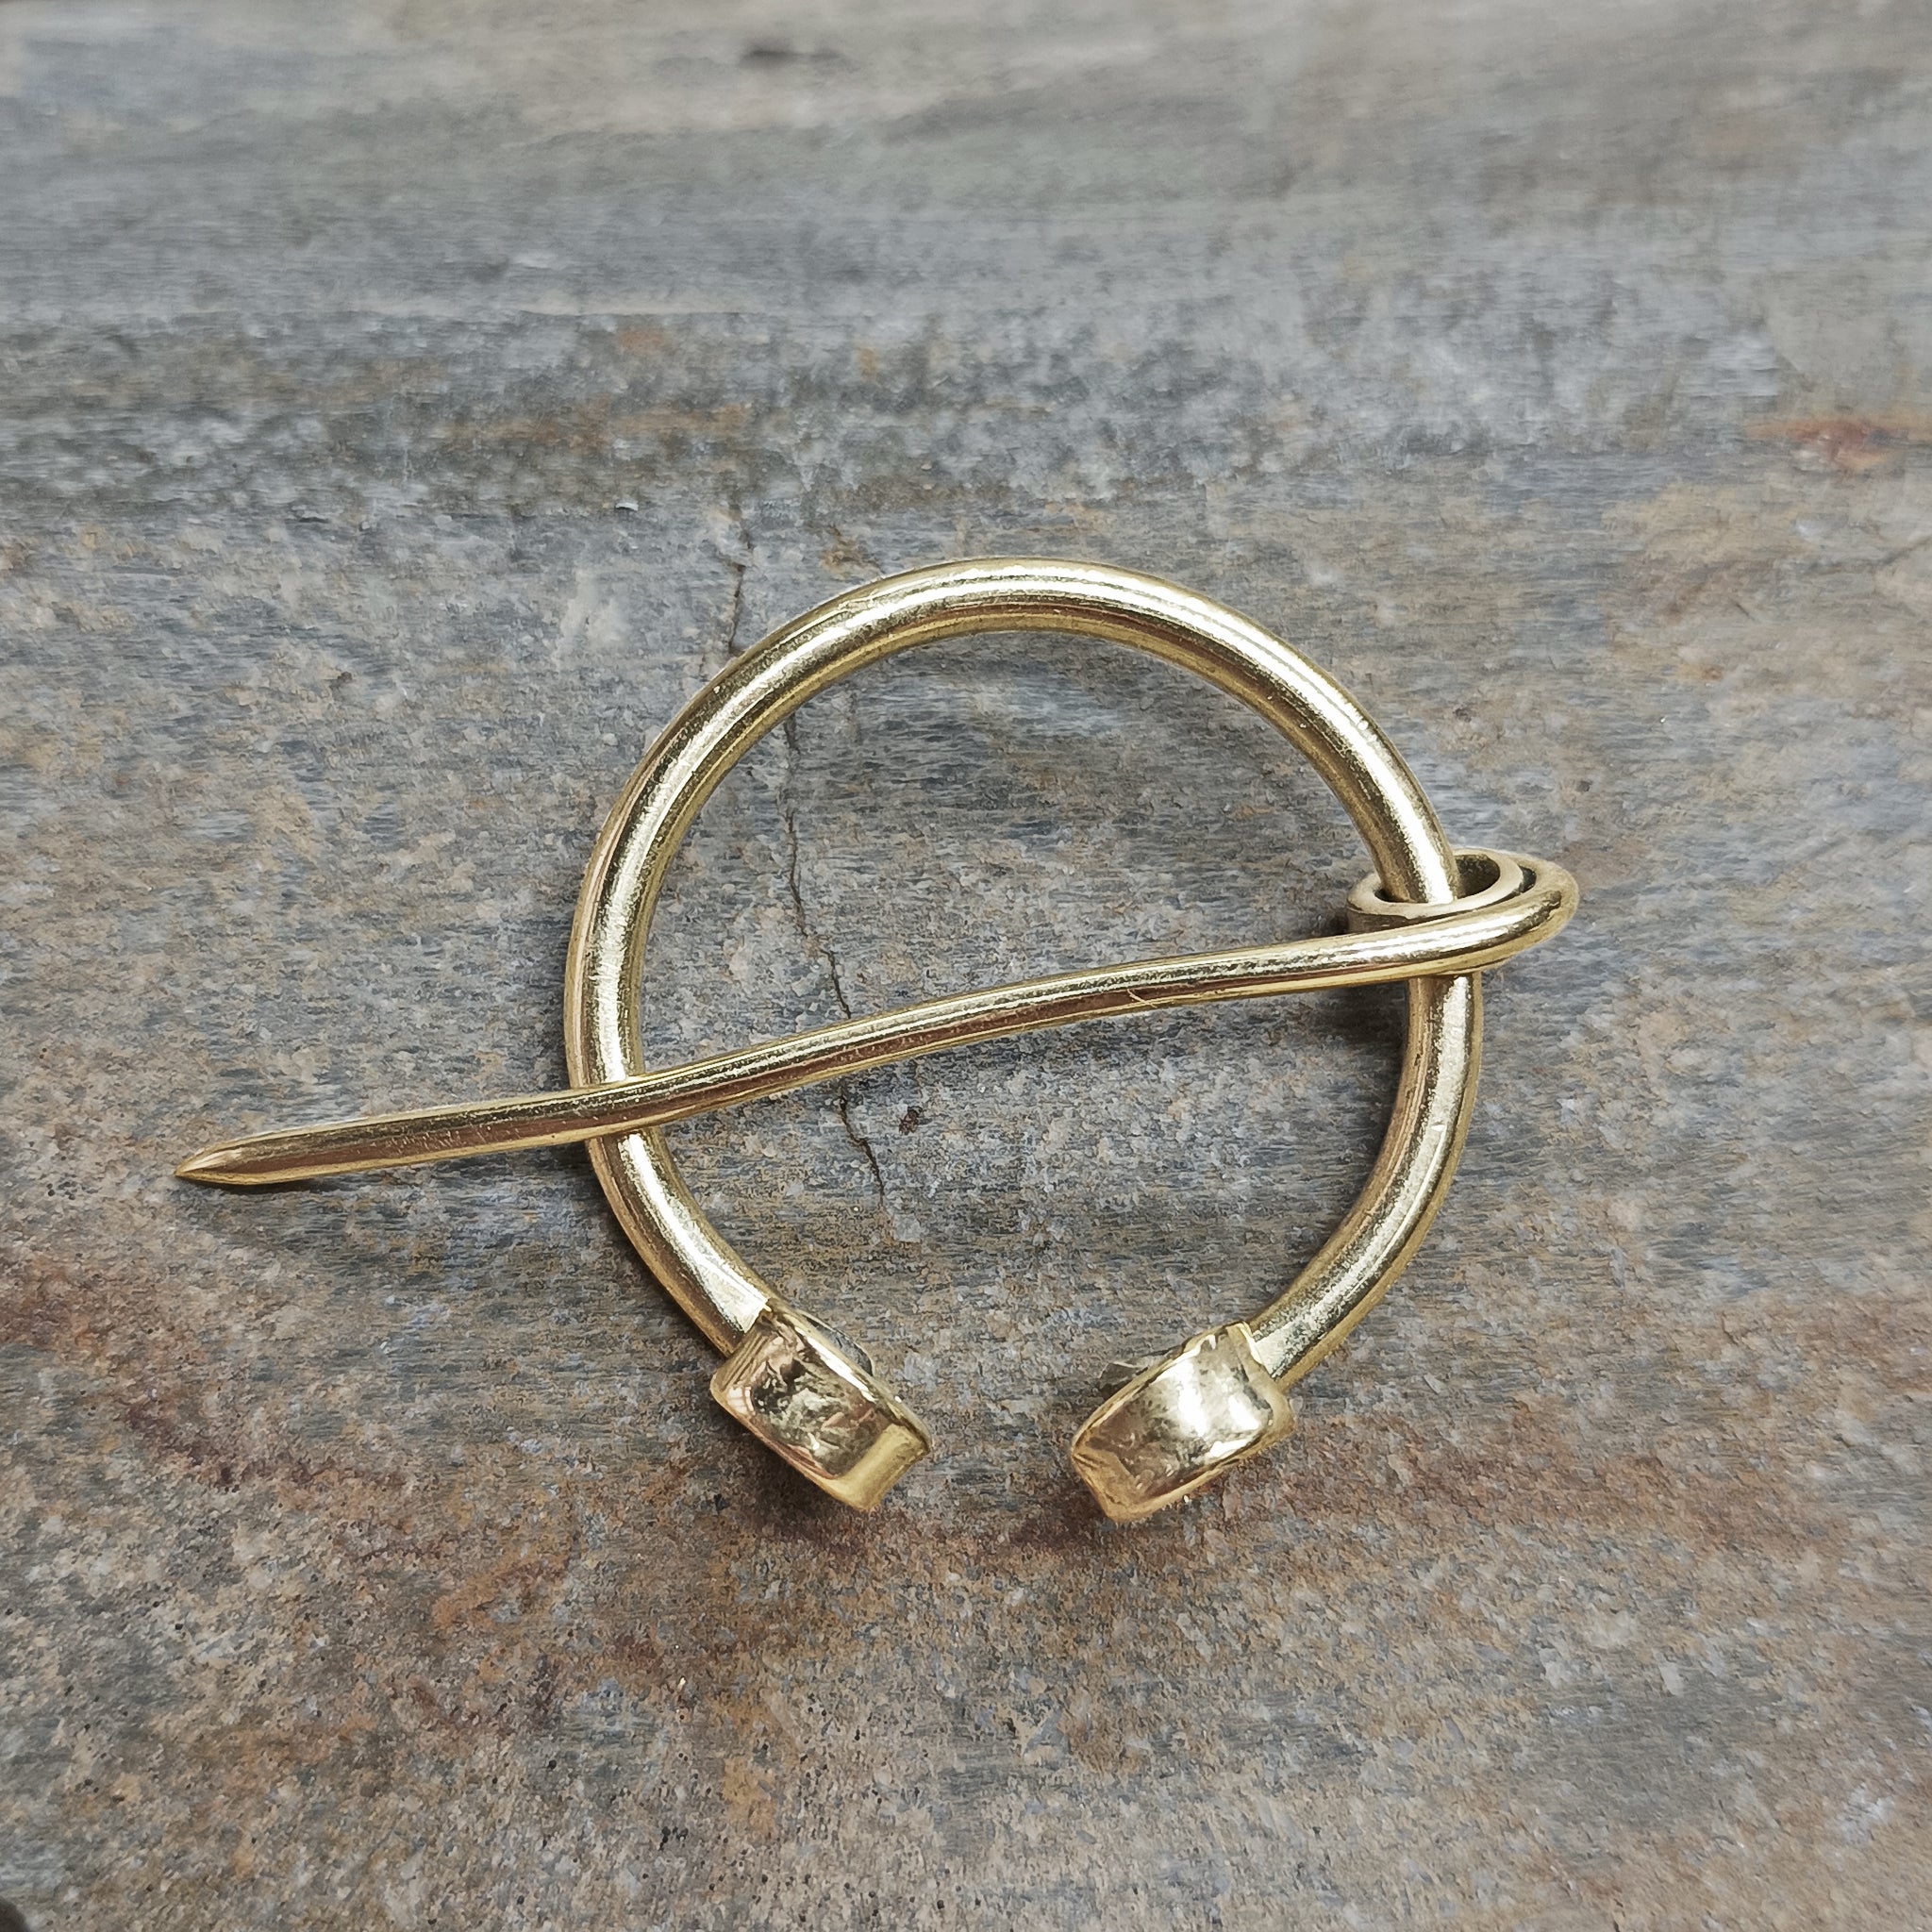 30mm Brass Cloak Pin / Clothes Pin on Rock